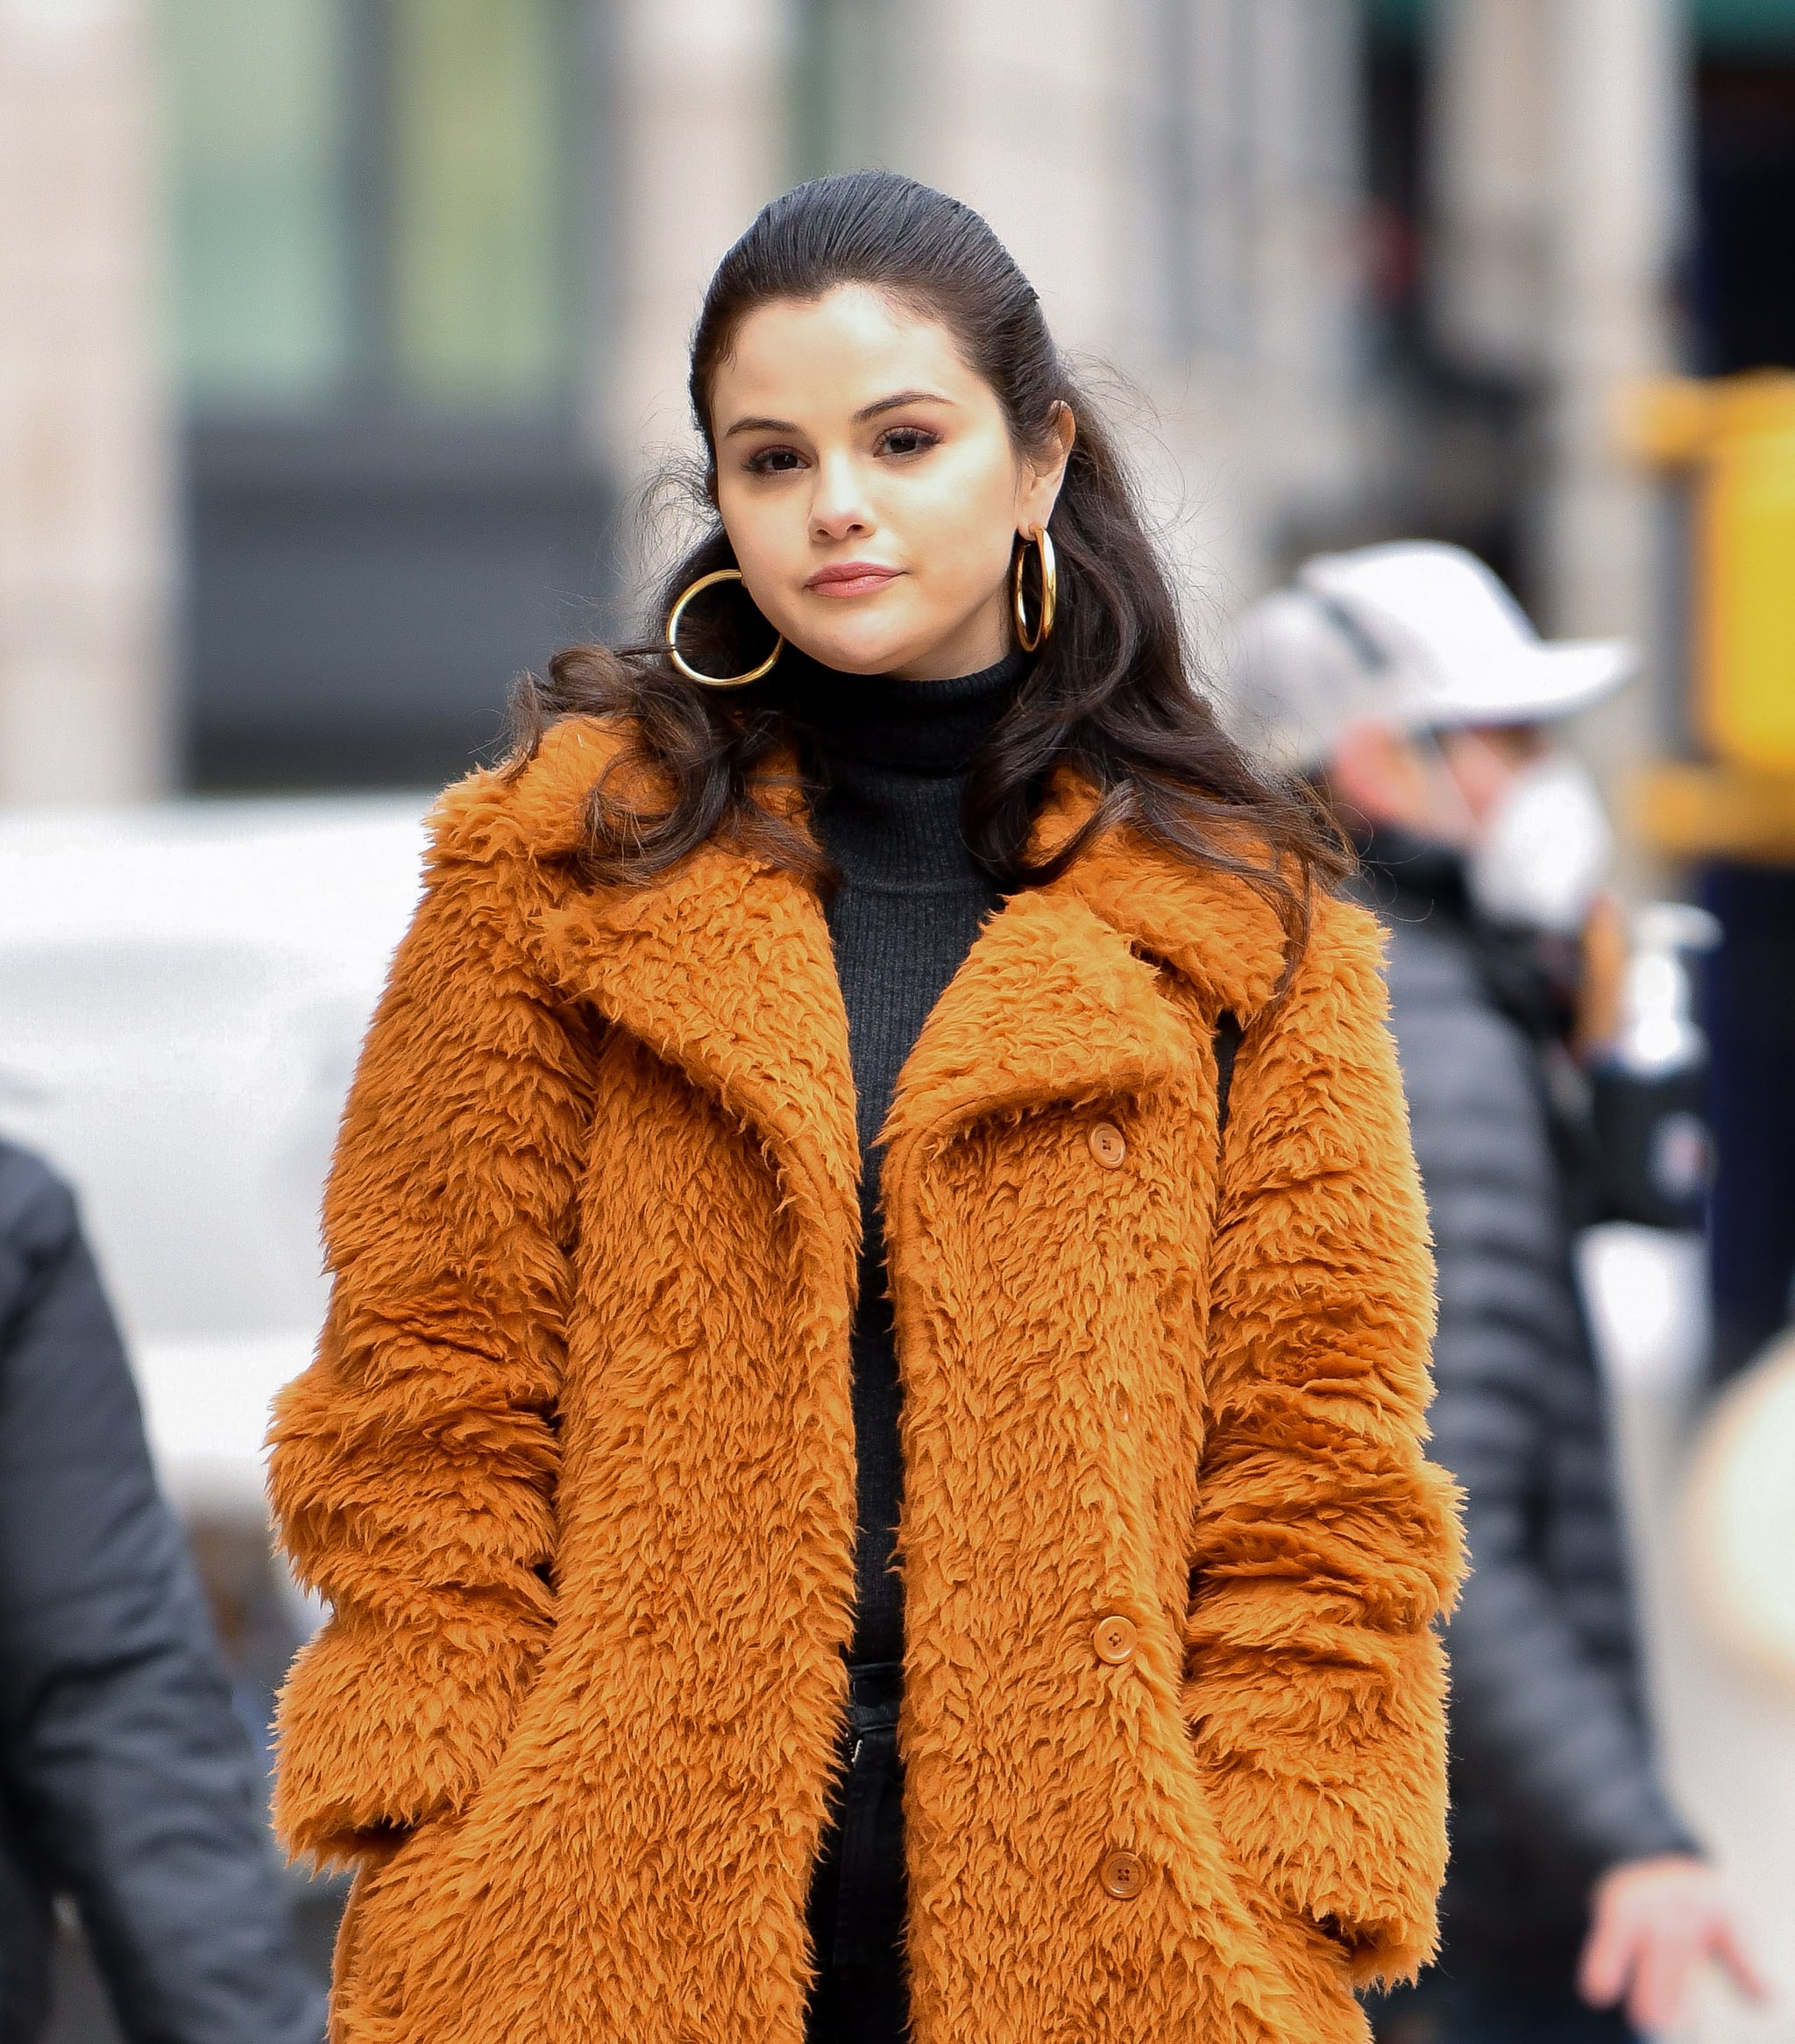 NEW YORK, NY - FEBRUARY 24:  Selena Gomez seen on the set of 'Only Murders in the Building' in Manhattan on February 24, 2021 in New York City.  (Photo by James Devaney/GC Images)